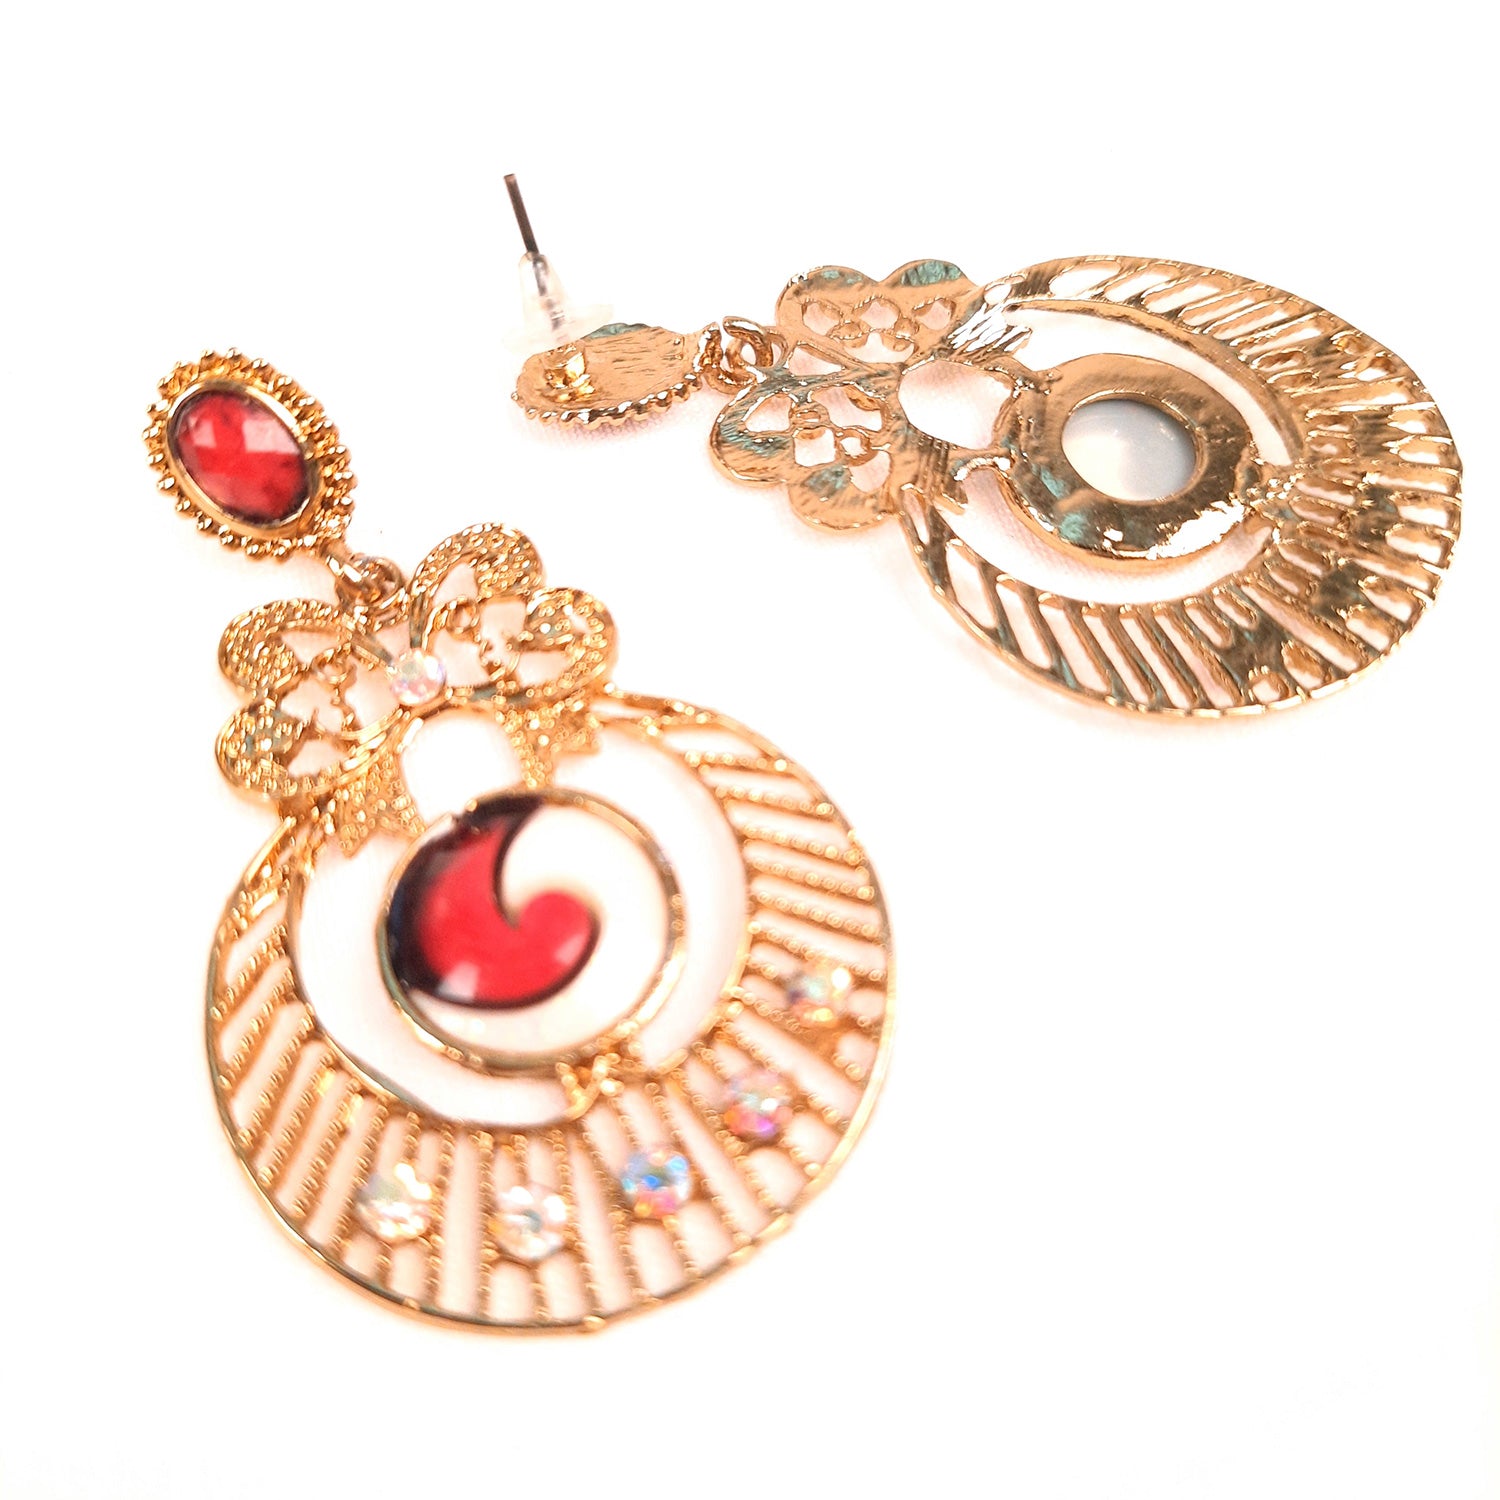 Earrings Danglers - for Girls and Women | Latest Stylish Fashion Jewellery | Gifts for Her, Friendship Day, Valentine's Day Gift - Apkamart